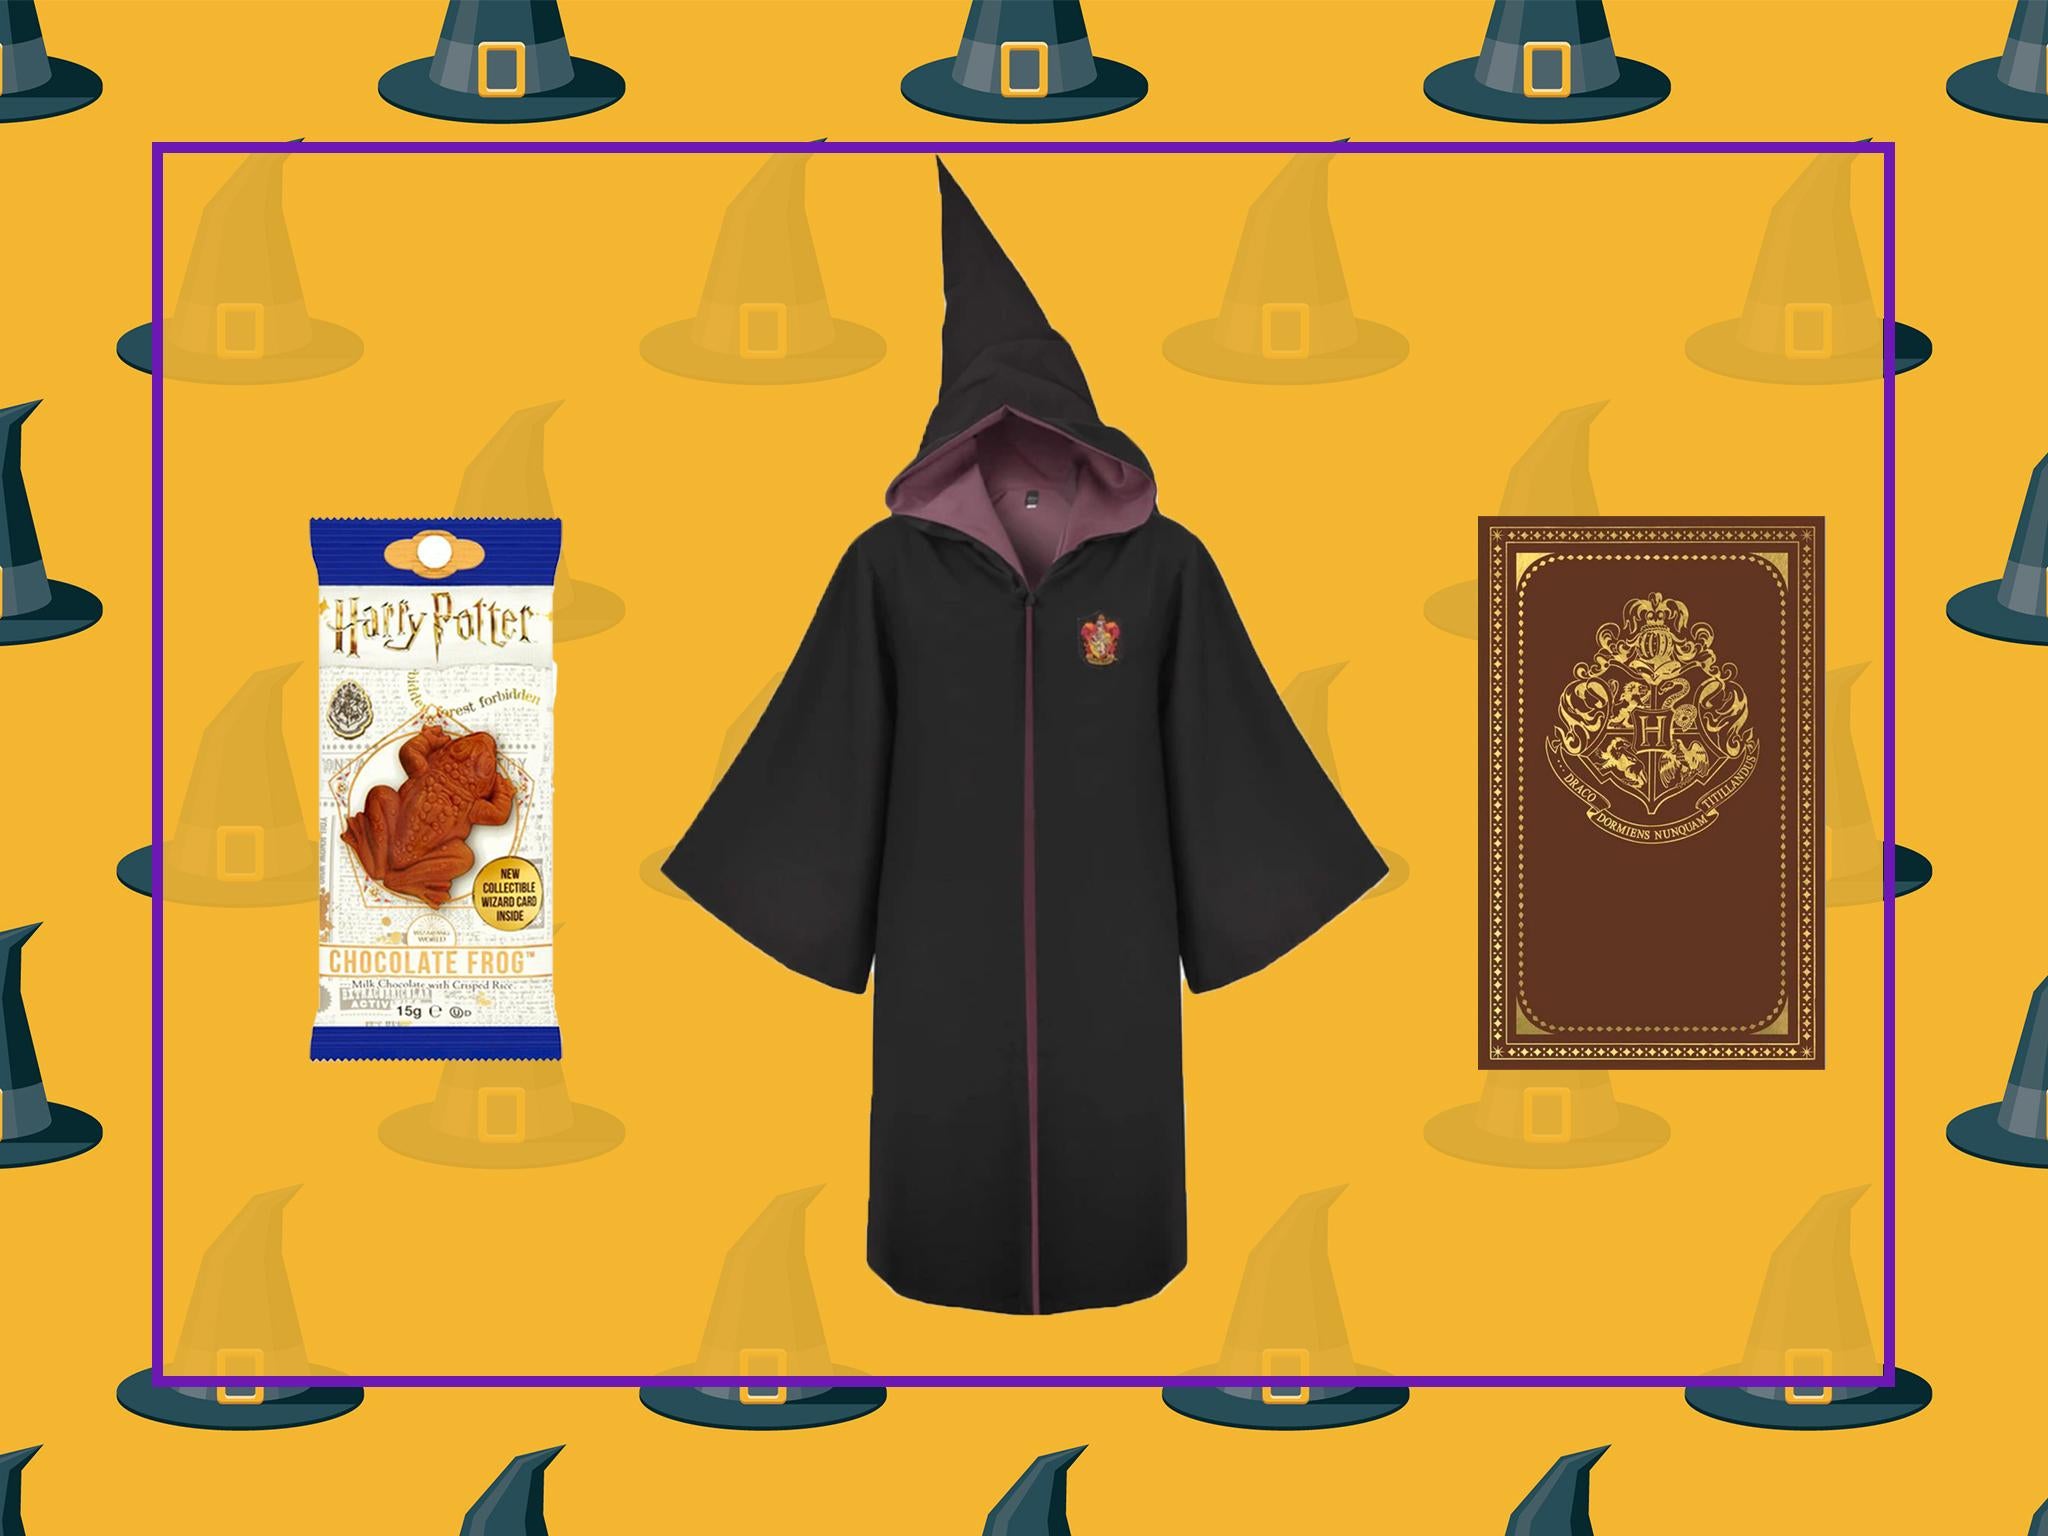 Back to Hogwarts Day 2020: Everything you need to celebrate the